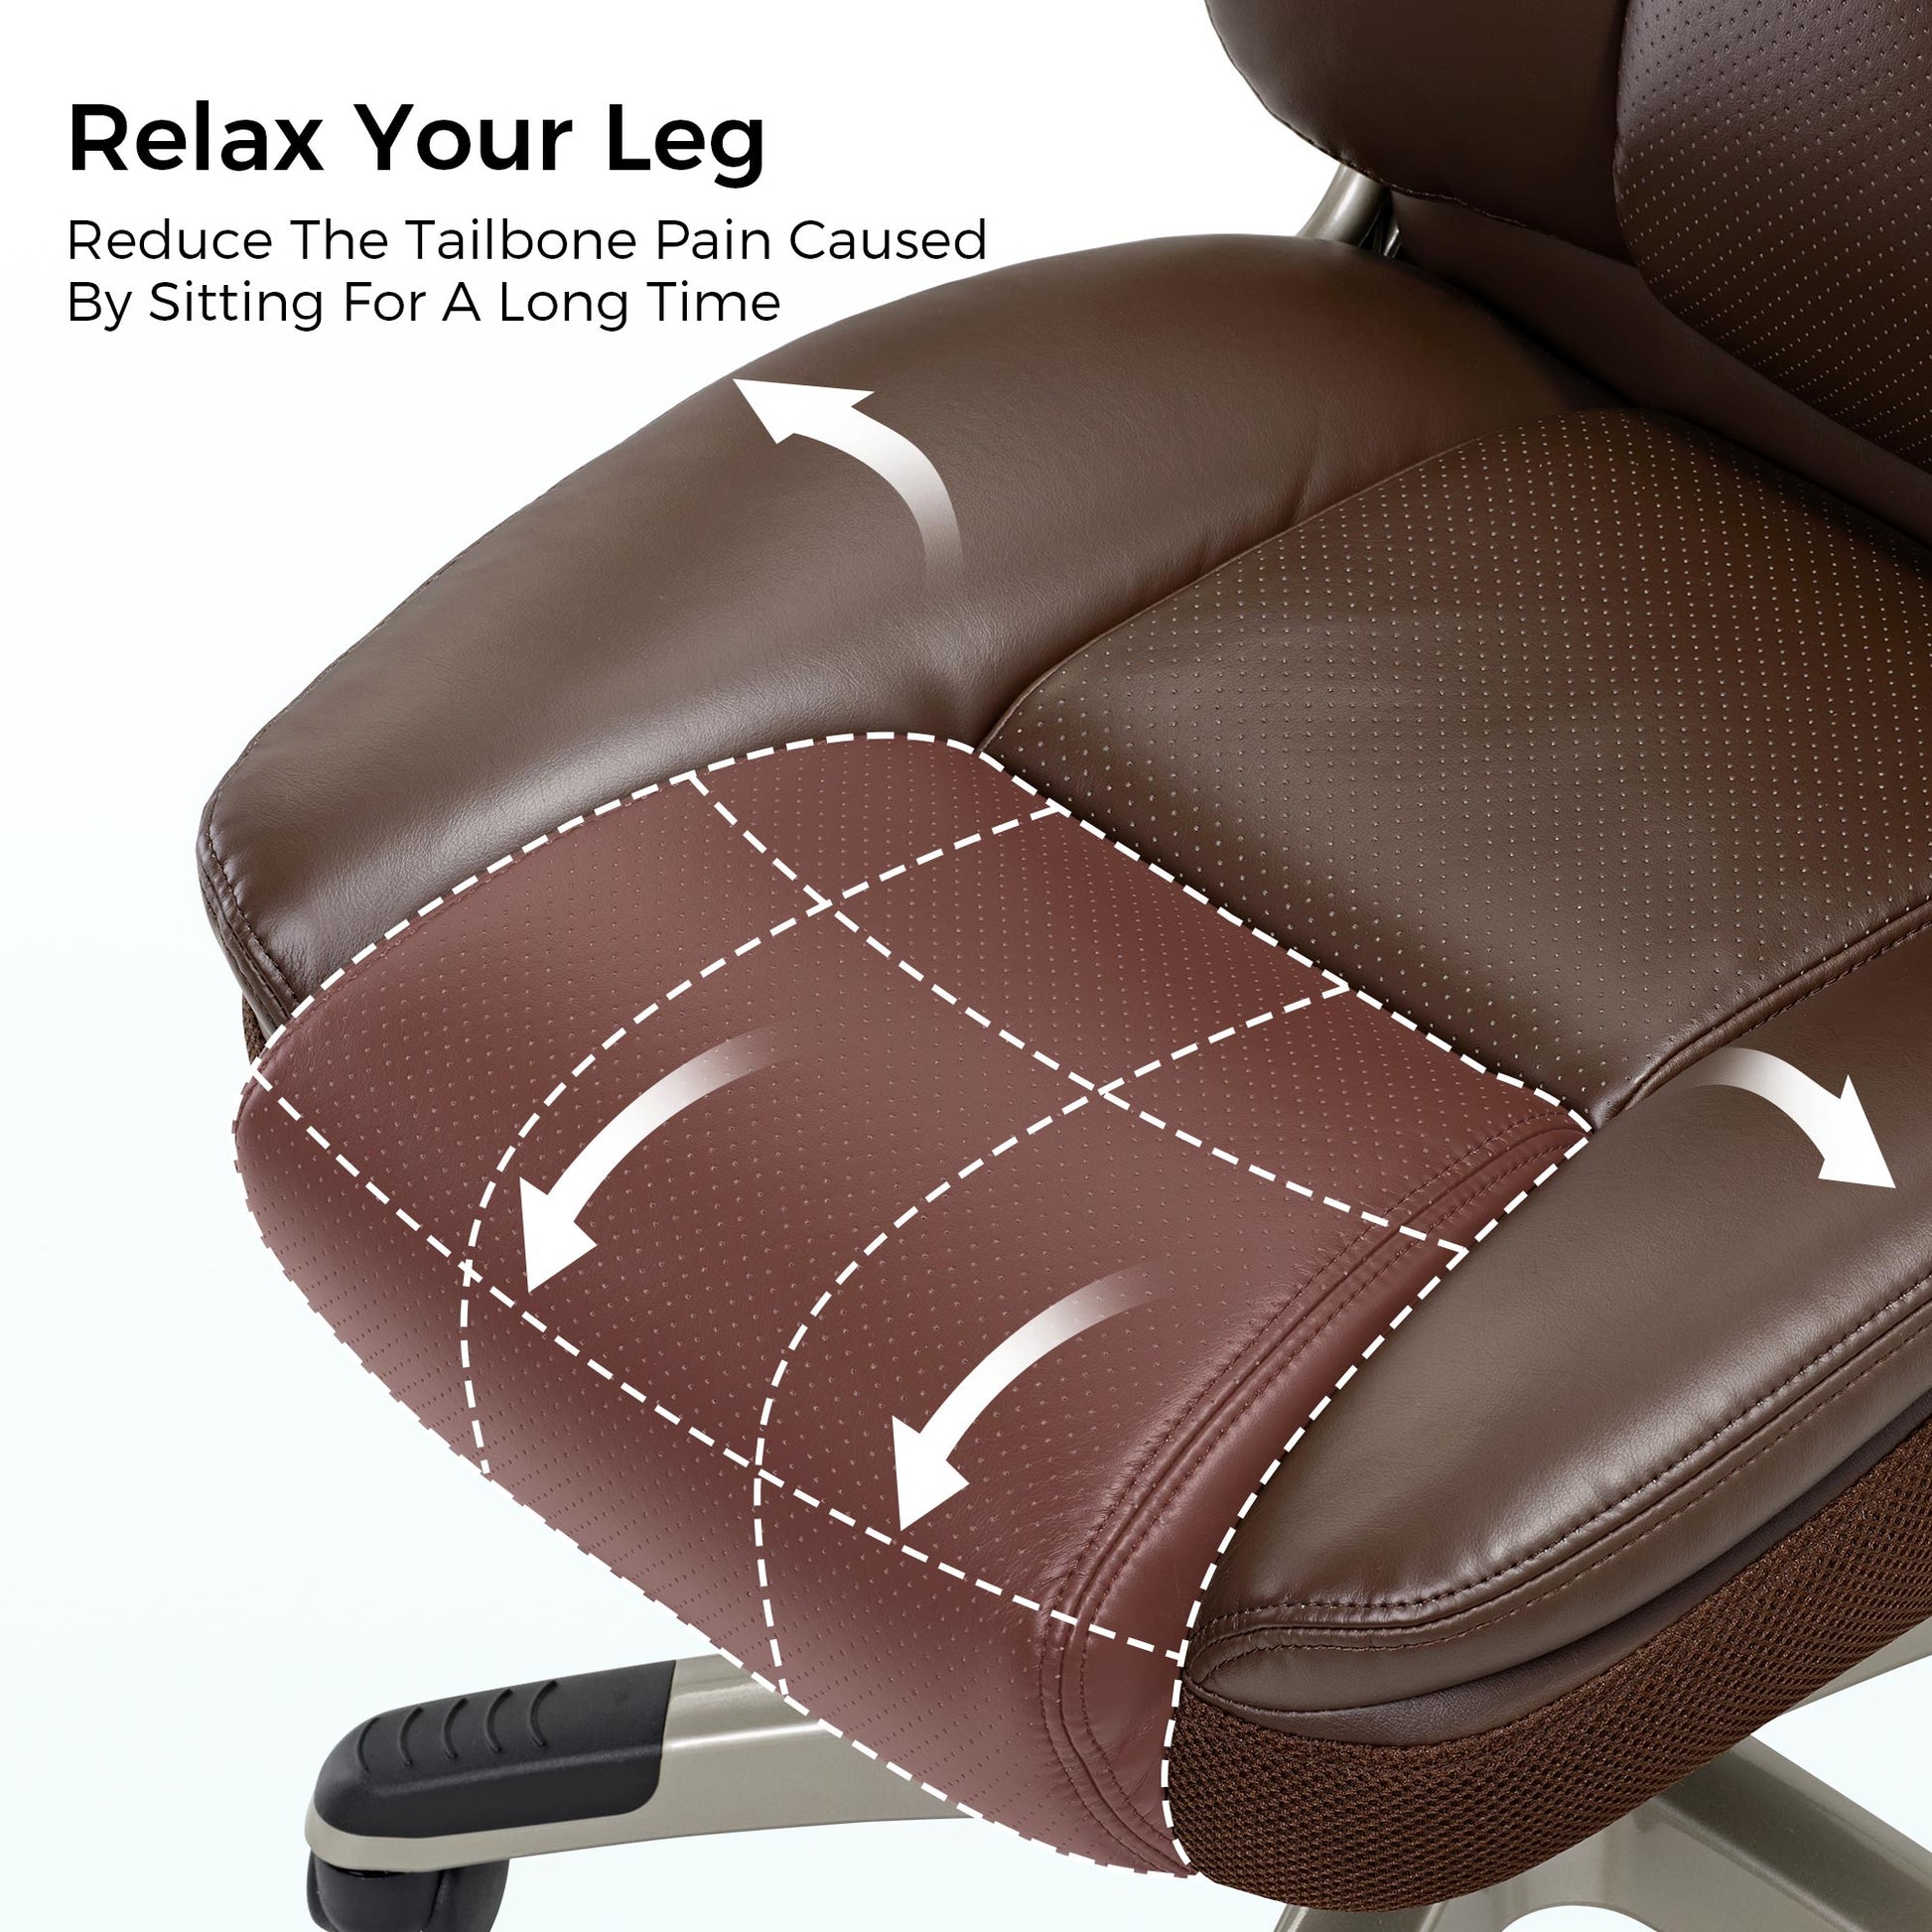 Galene, Home Office Chair, Brown, Breathable cushioned PU Leather Fabric, Relax Your Leg, Reduce the Tailbone Pain Caused By Sitting For A Long Time